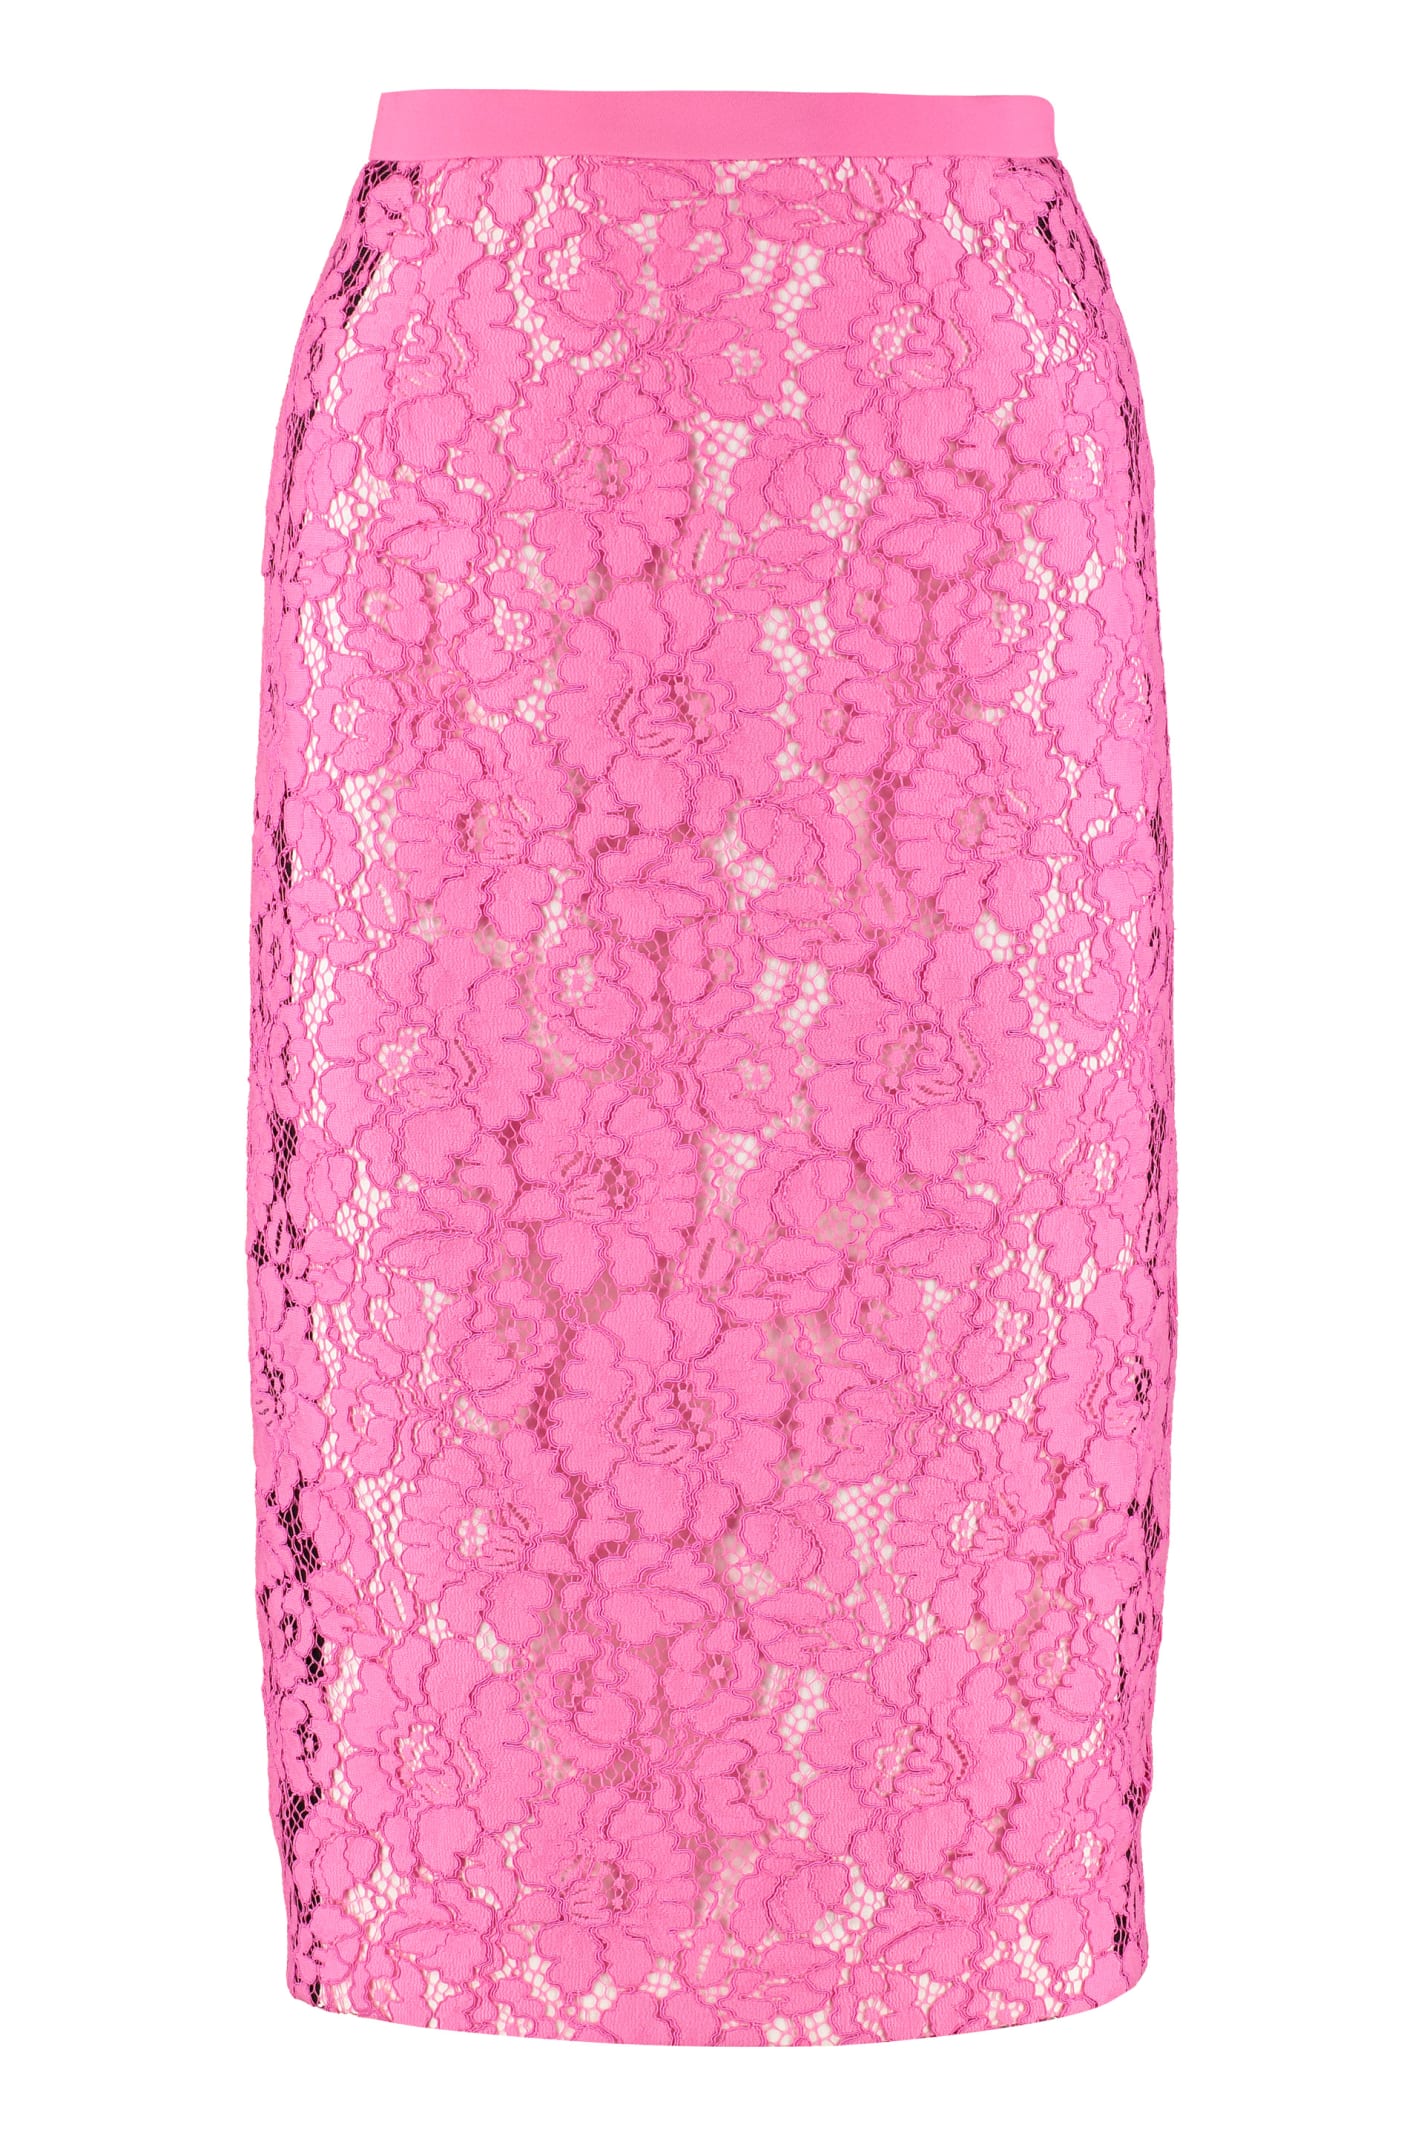 N°21 LACE PENCIL SKIRT,11206676